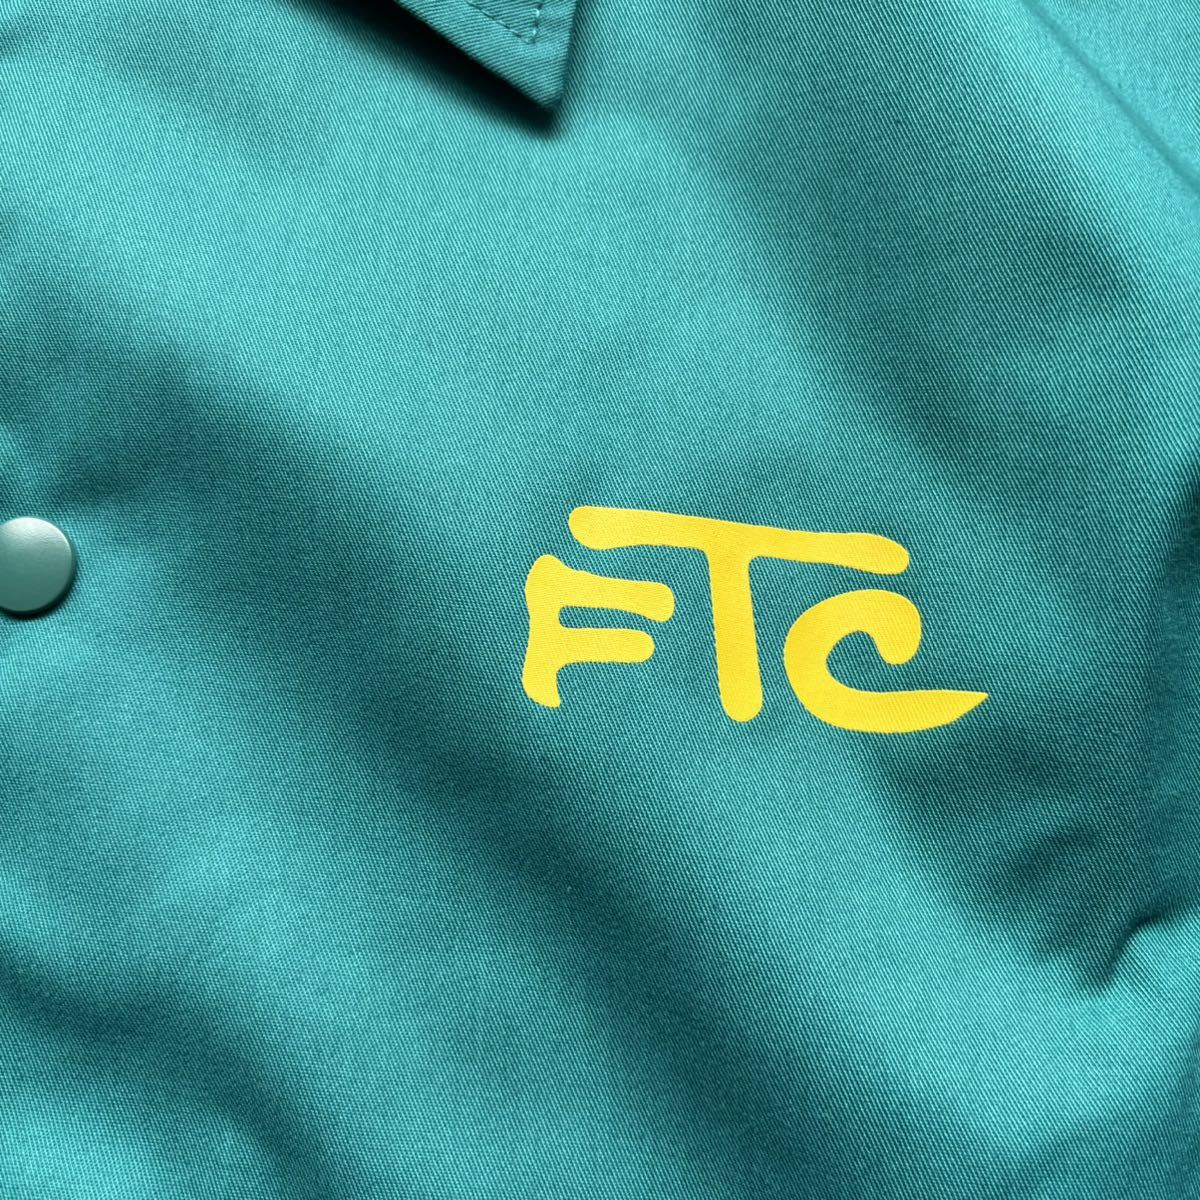 FTC / エフティーシーWITH A GIRL COACH JACKET 古着_画像5